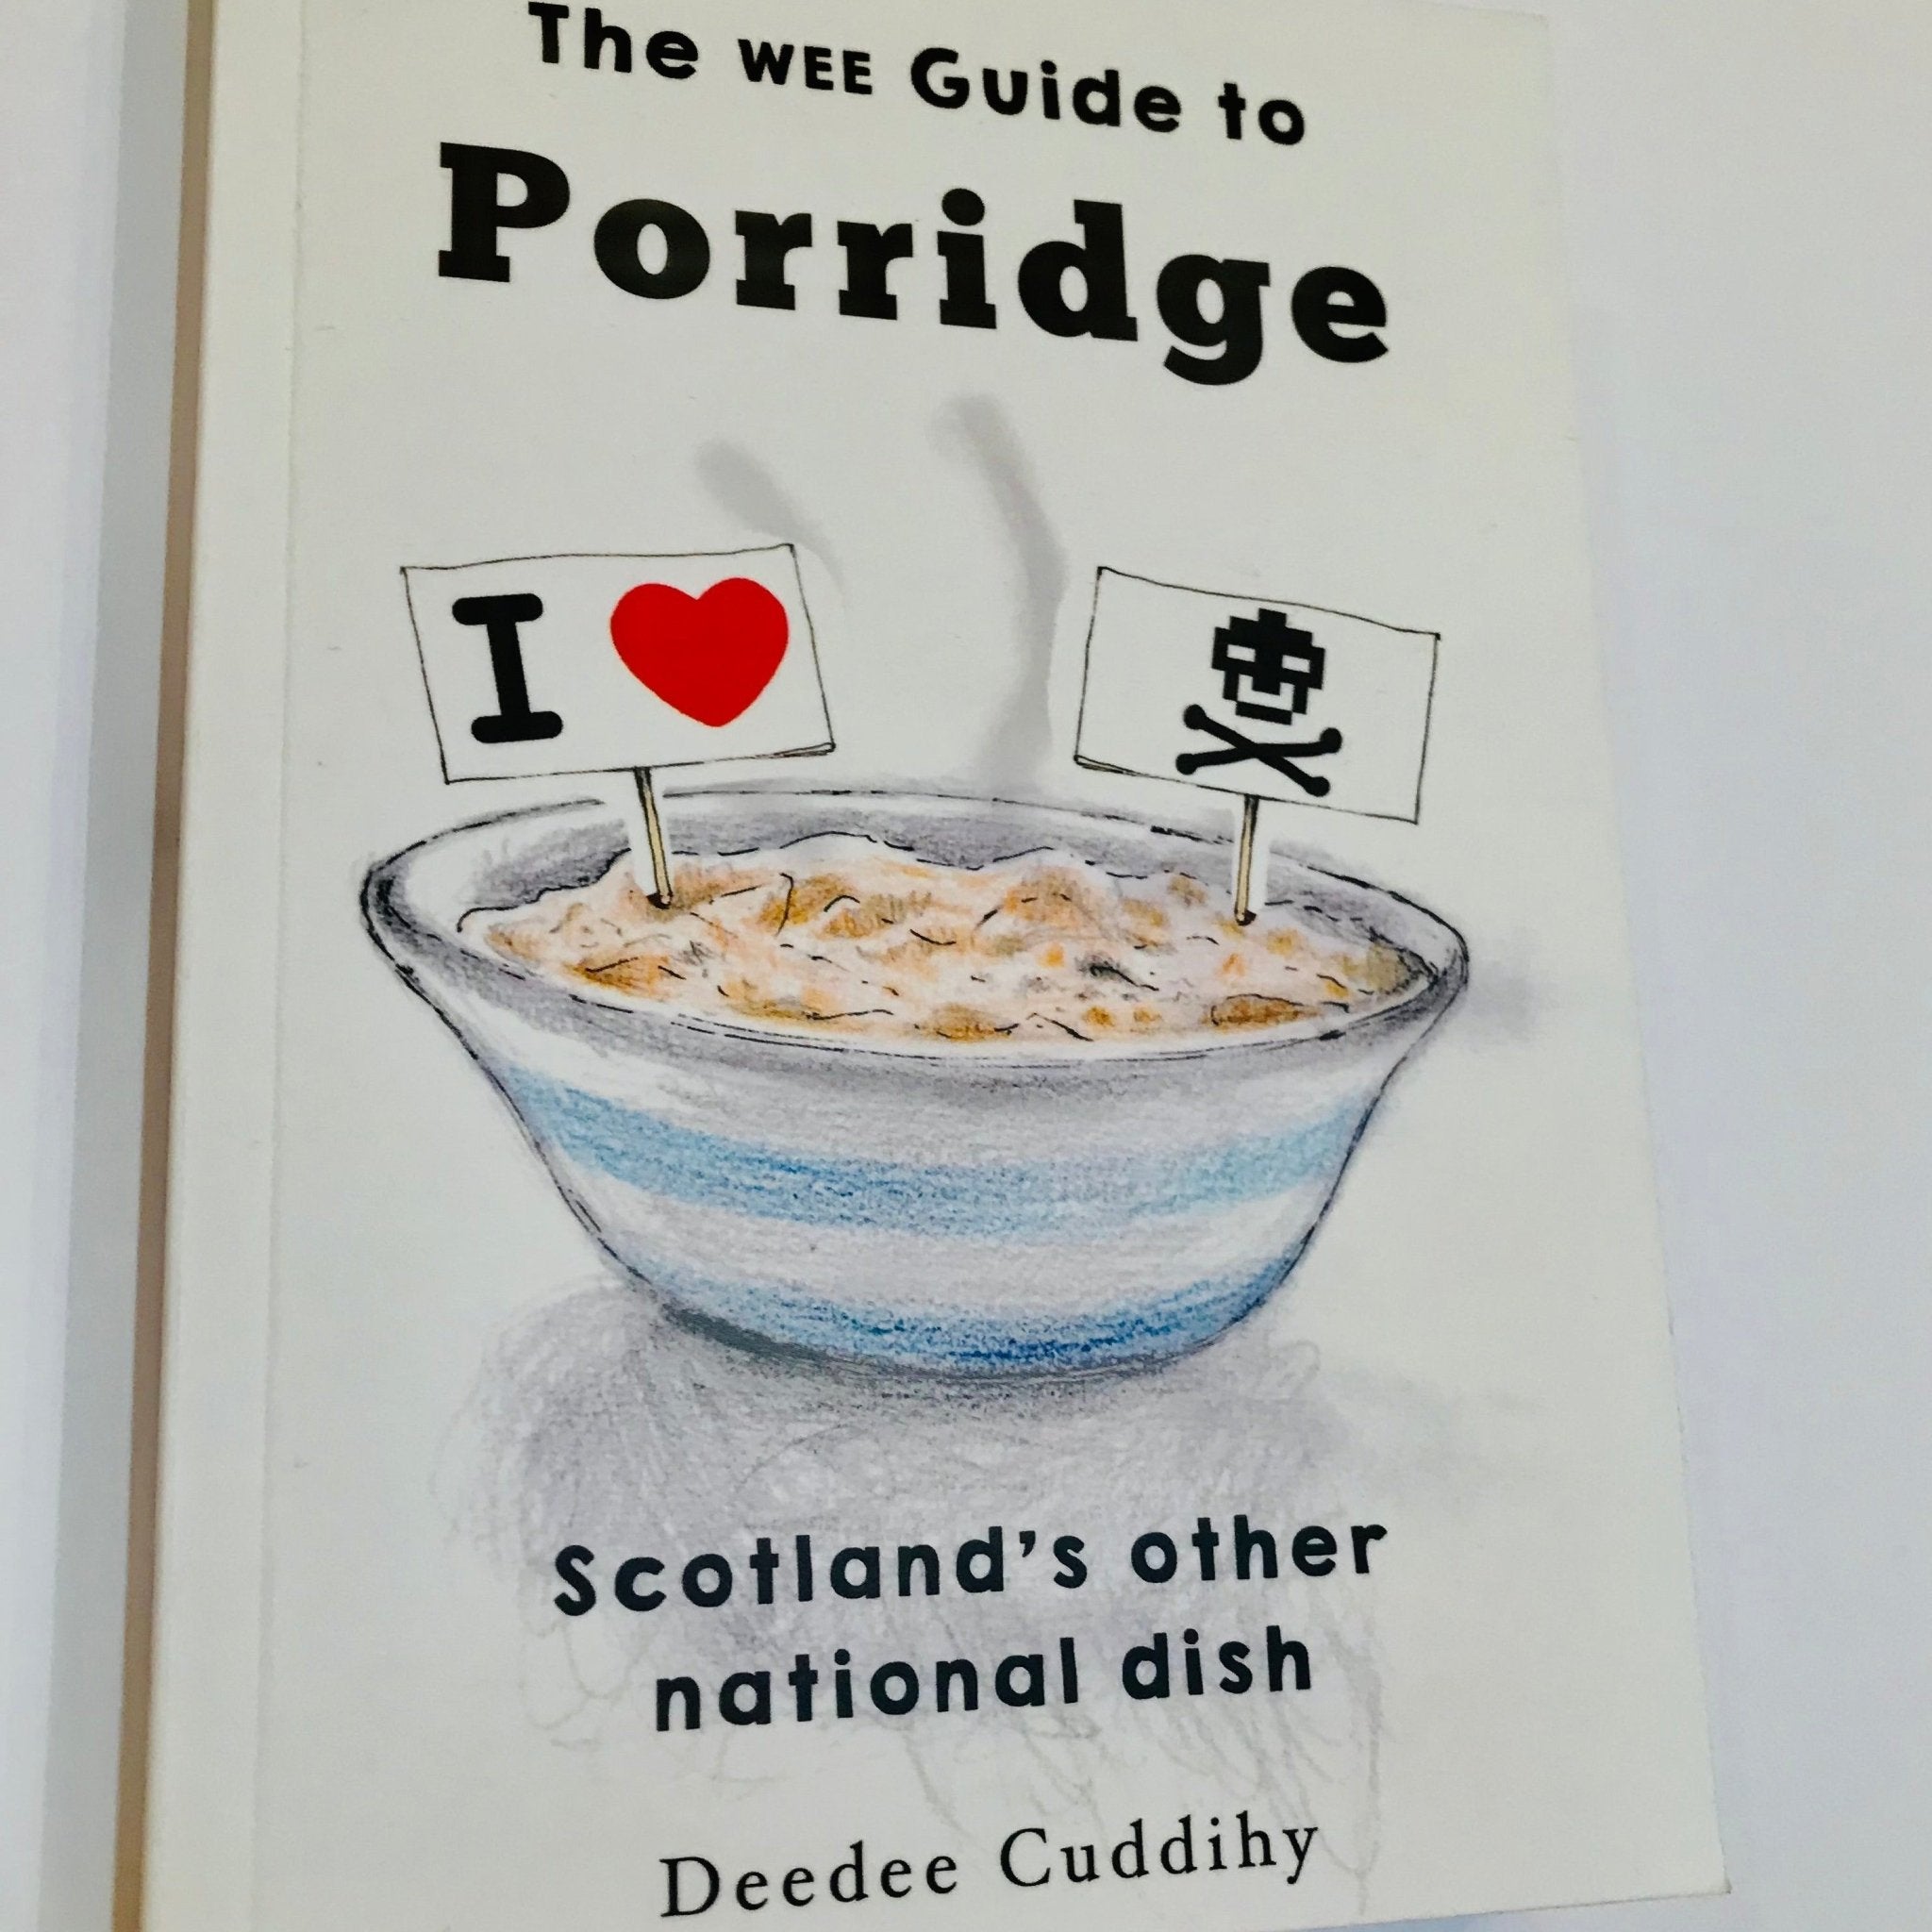 The Wee Guide to Porridge Book - The Nancy Smillie Shop - Art, Jewellery & Designer Gifts Glasgow